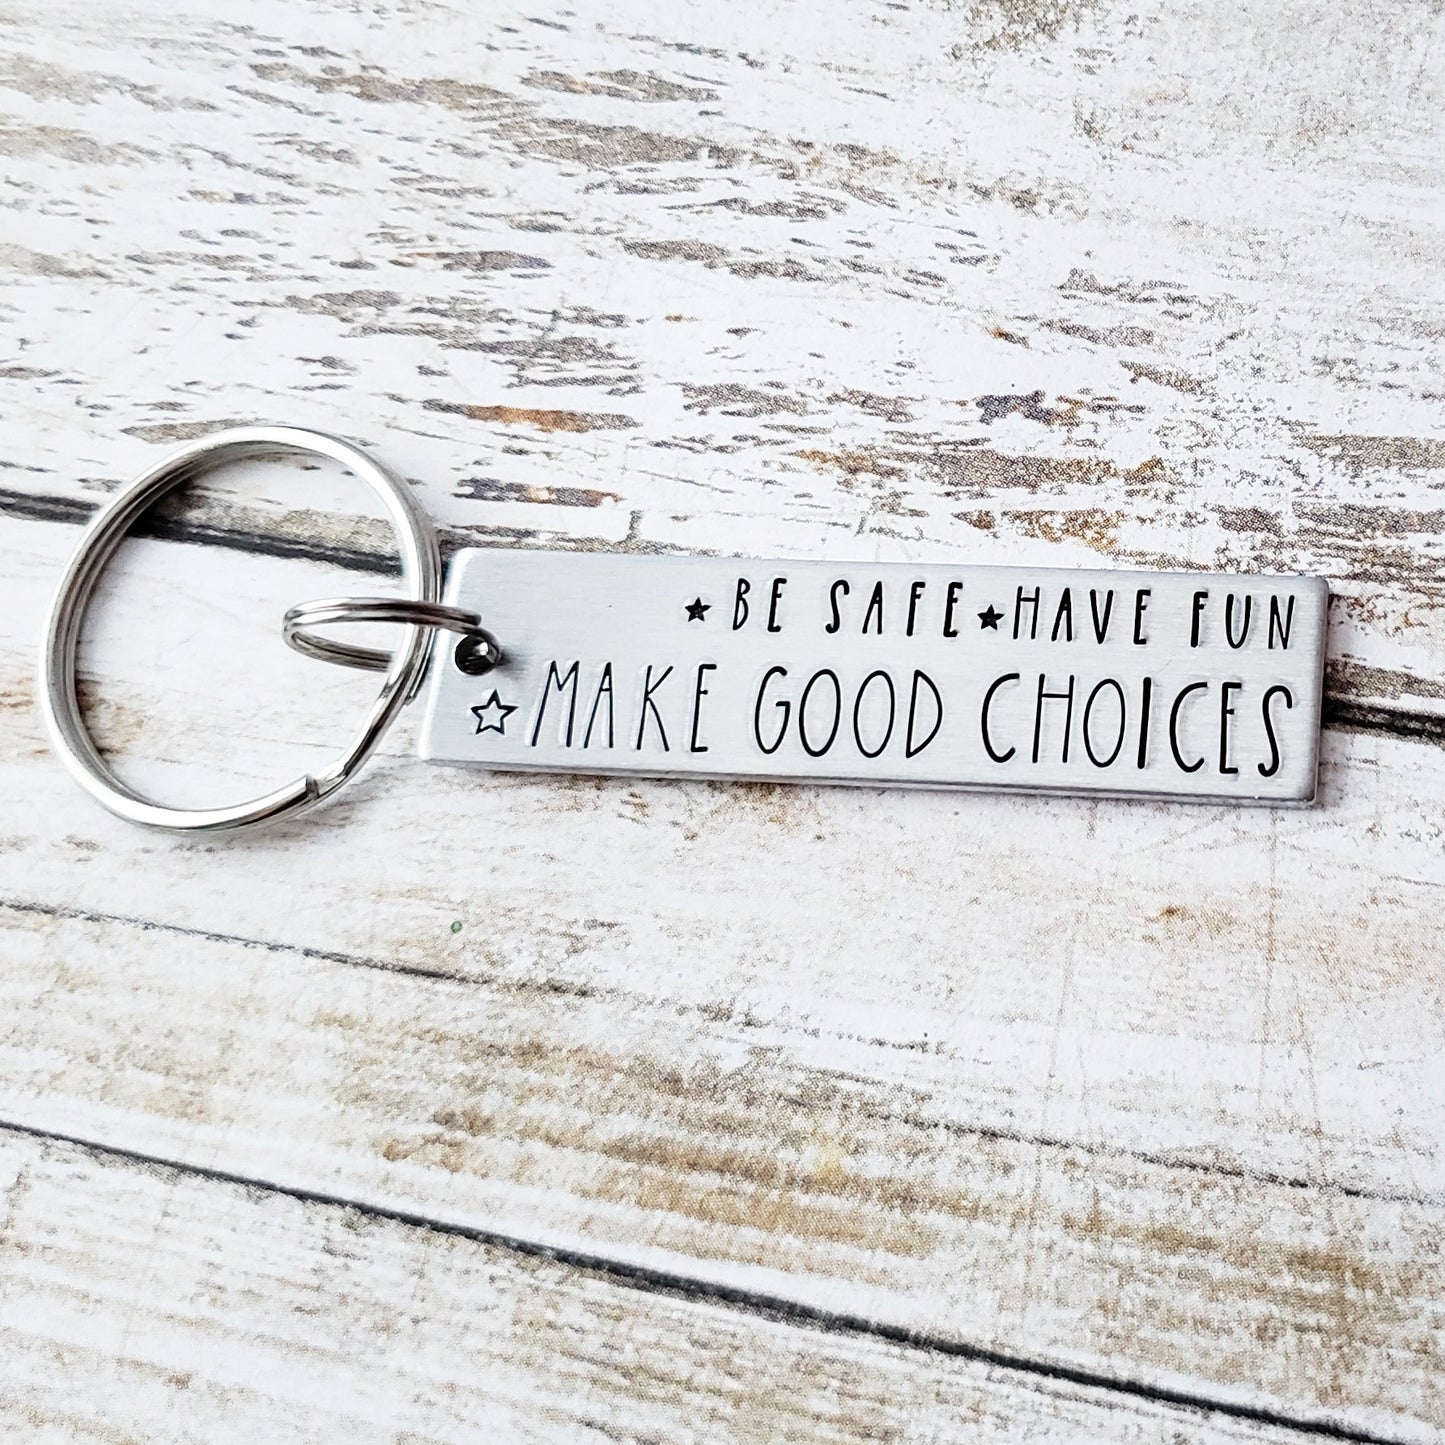 Be Safe. Have Fun. Make Good Choices. Love Mom & Dad, Teenager Key Chain,  New Driver Gift, Sweet Sixteen Birthday, BE SAFE Keychain 